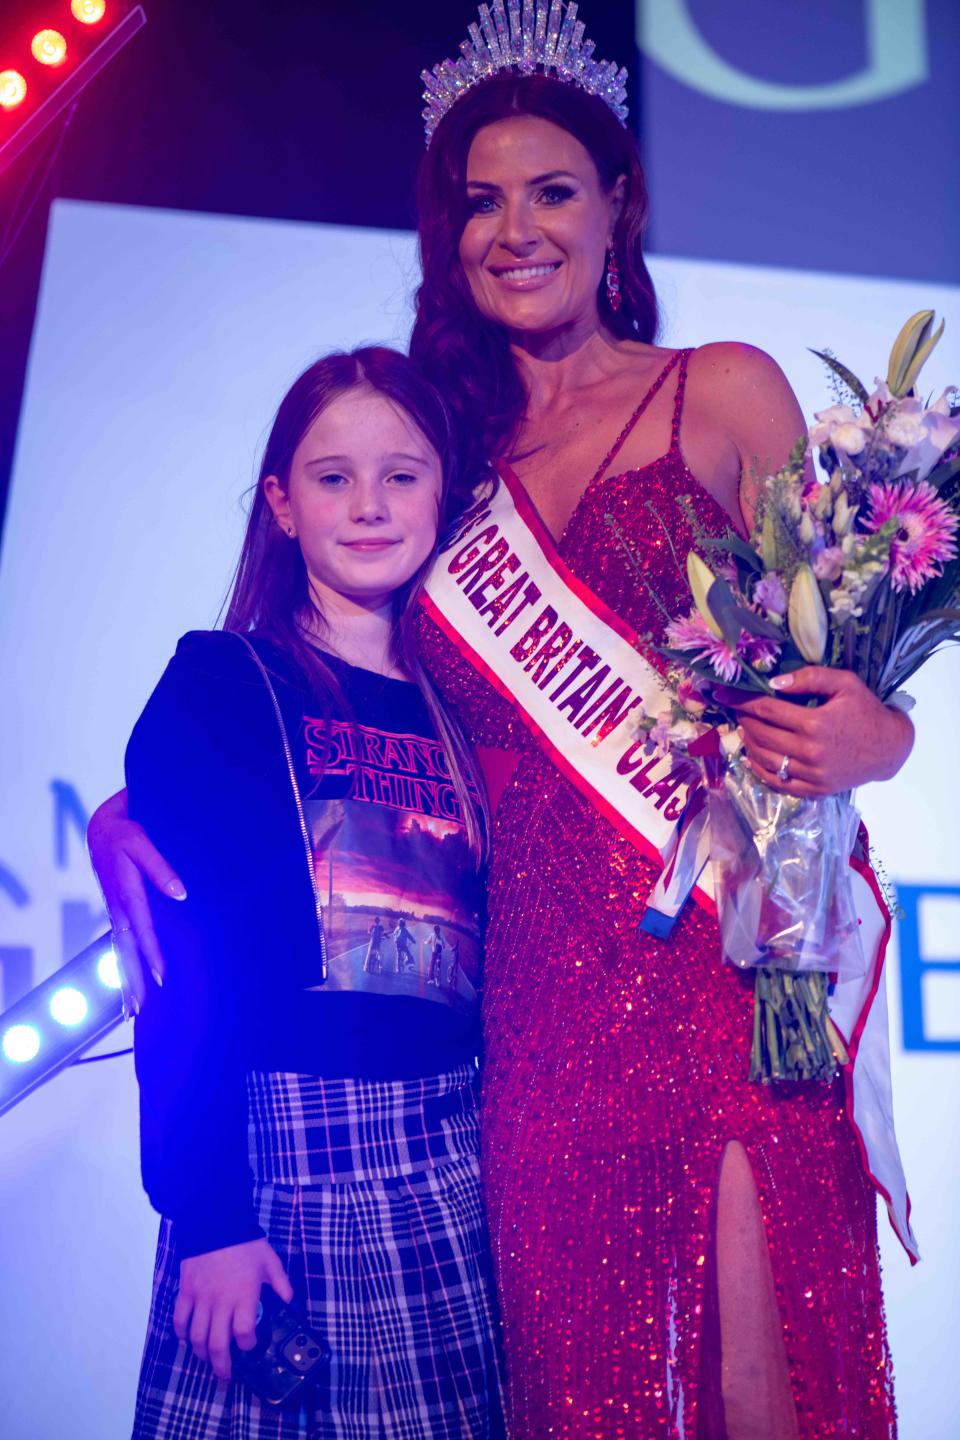 Gina Broadhurst says her daughter Genevieve, 11, loves the fact she won Miss Great Britain Classic. (Supplied)